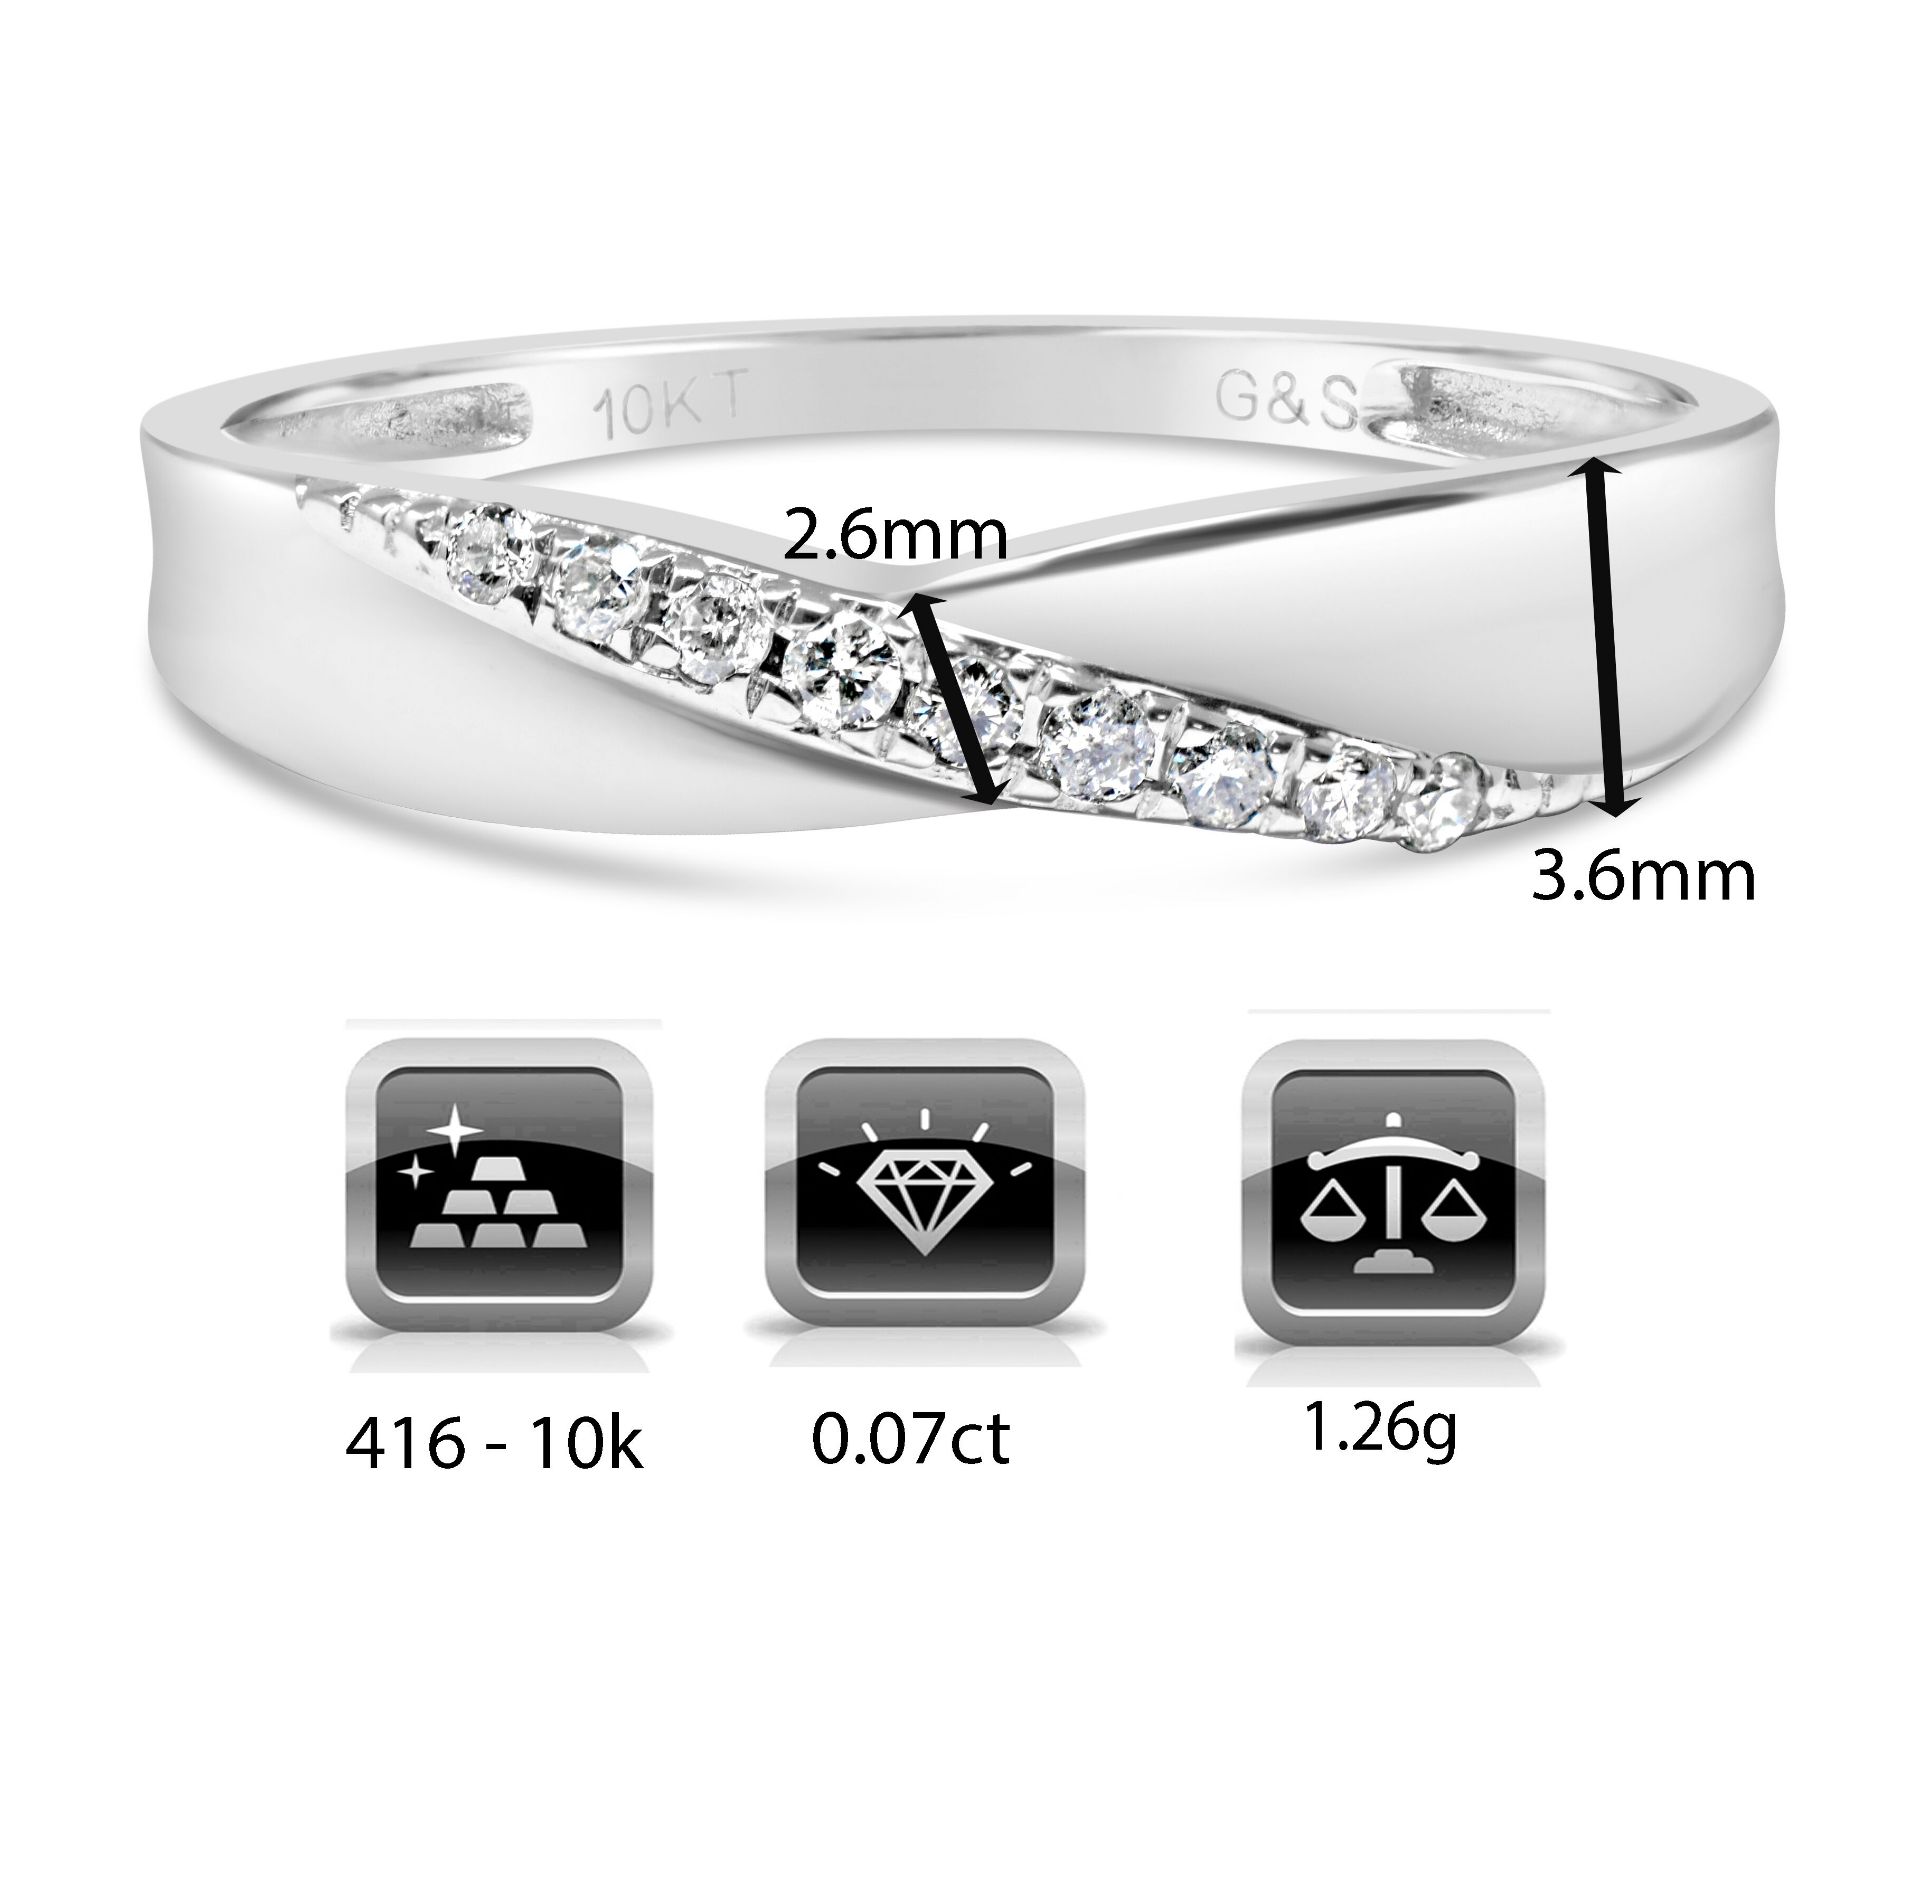 9CT White Gold Diamond Band with Twist, Metal 9ct - Image 2 of 3